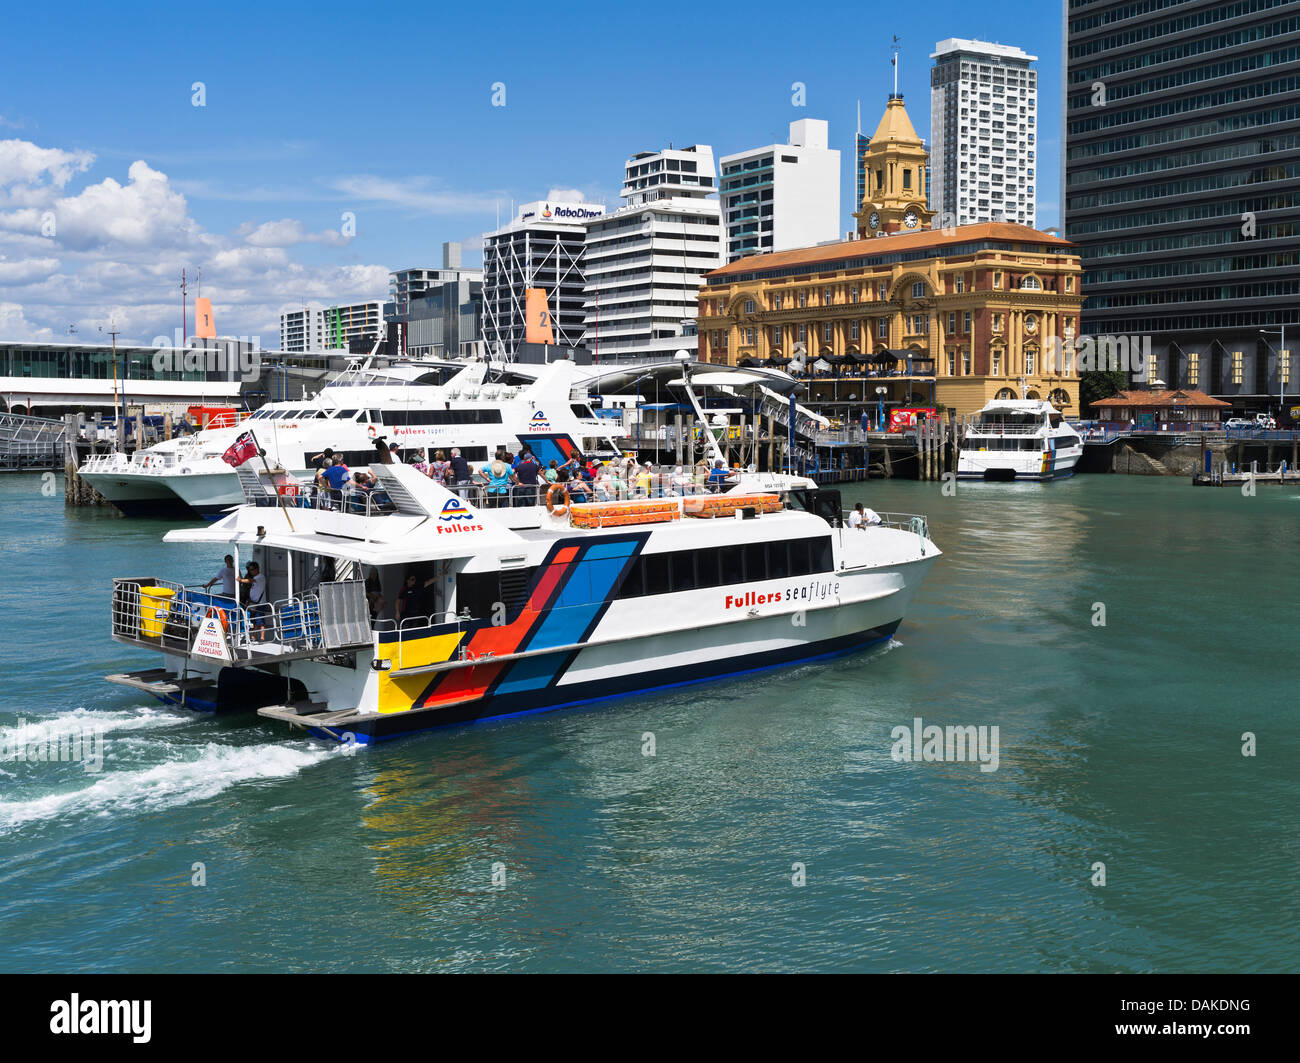 dh Catamaran ferry pier AUCKLAND NEW ZEALAND Harbour Ferries fullers sea flyte terminal building waterfront boat trip city waitemata harbor Stock Photo